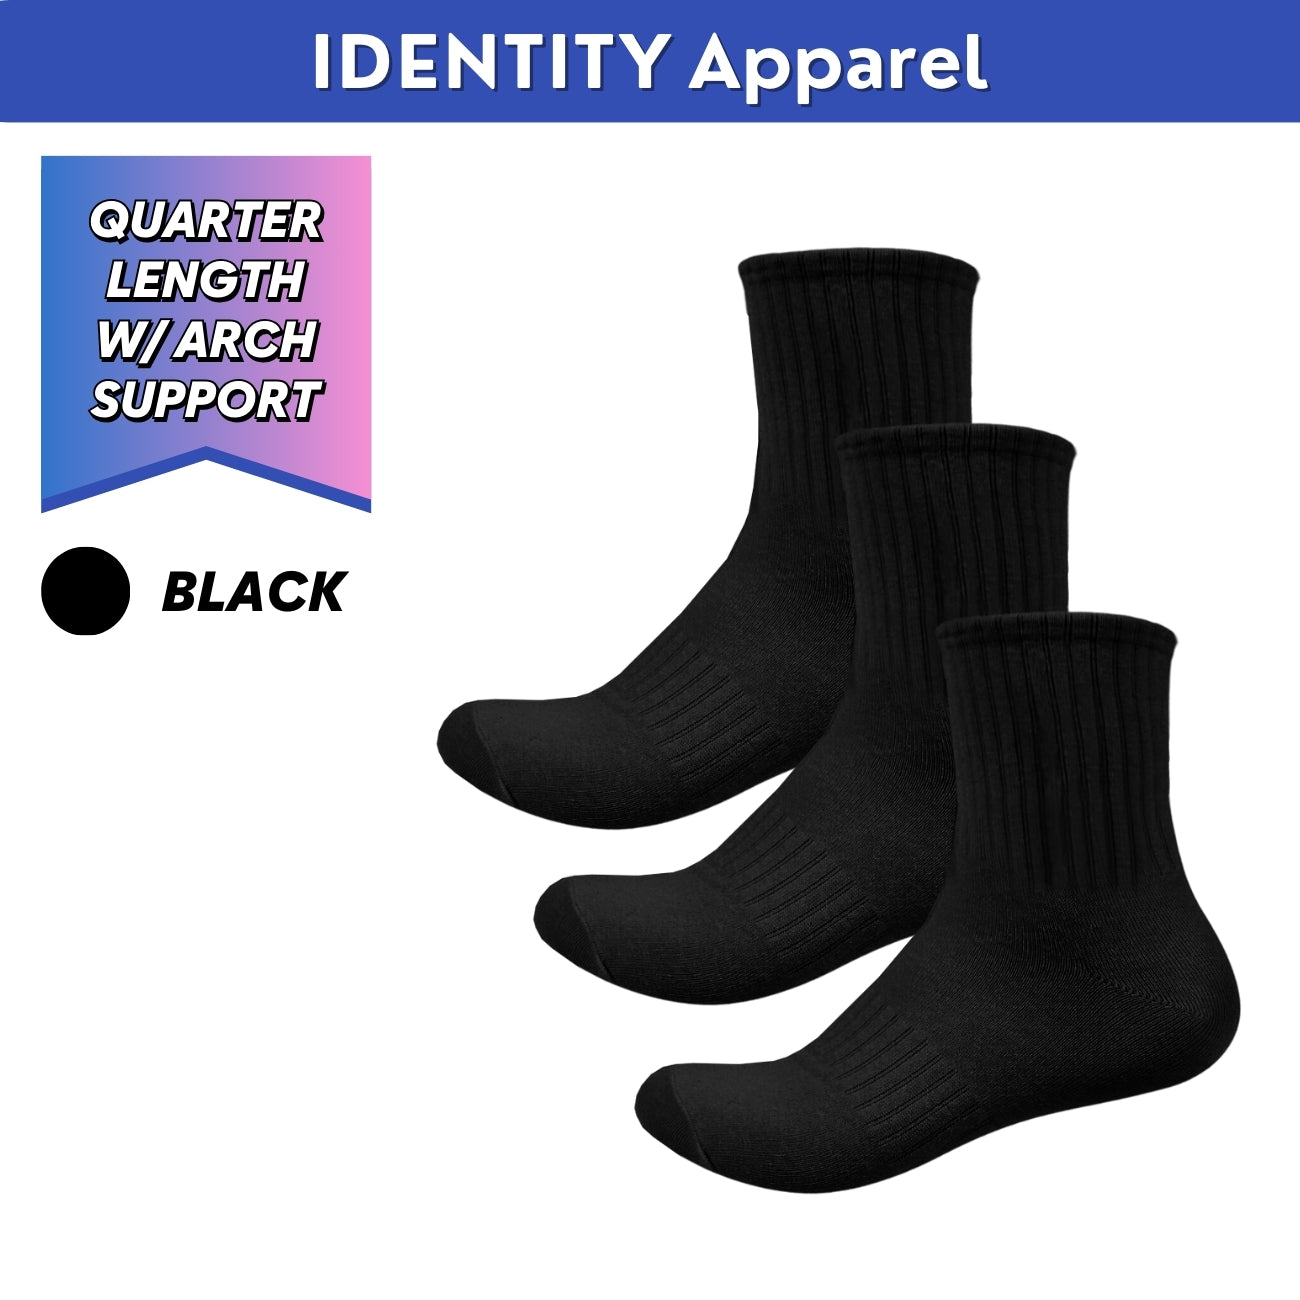 Mens Basic Quarter Length Cotton Socks with Arch Support - IDENTITY Apparel Shop